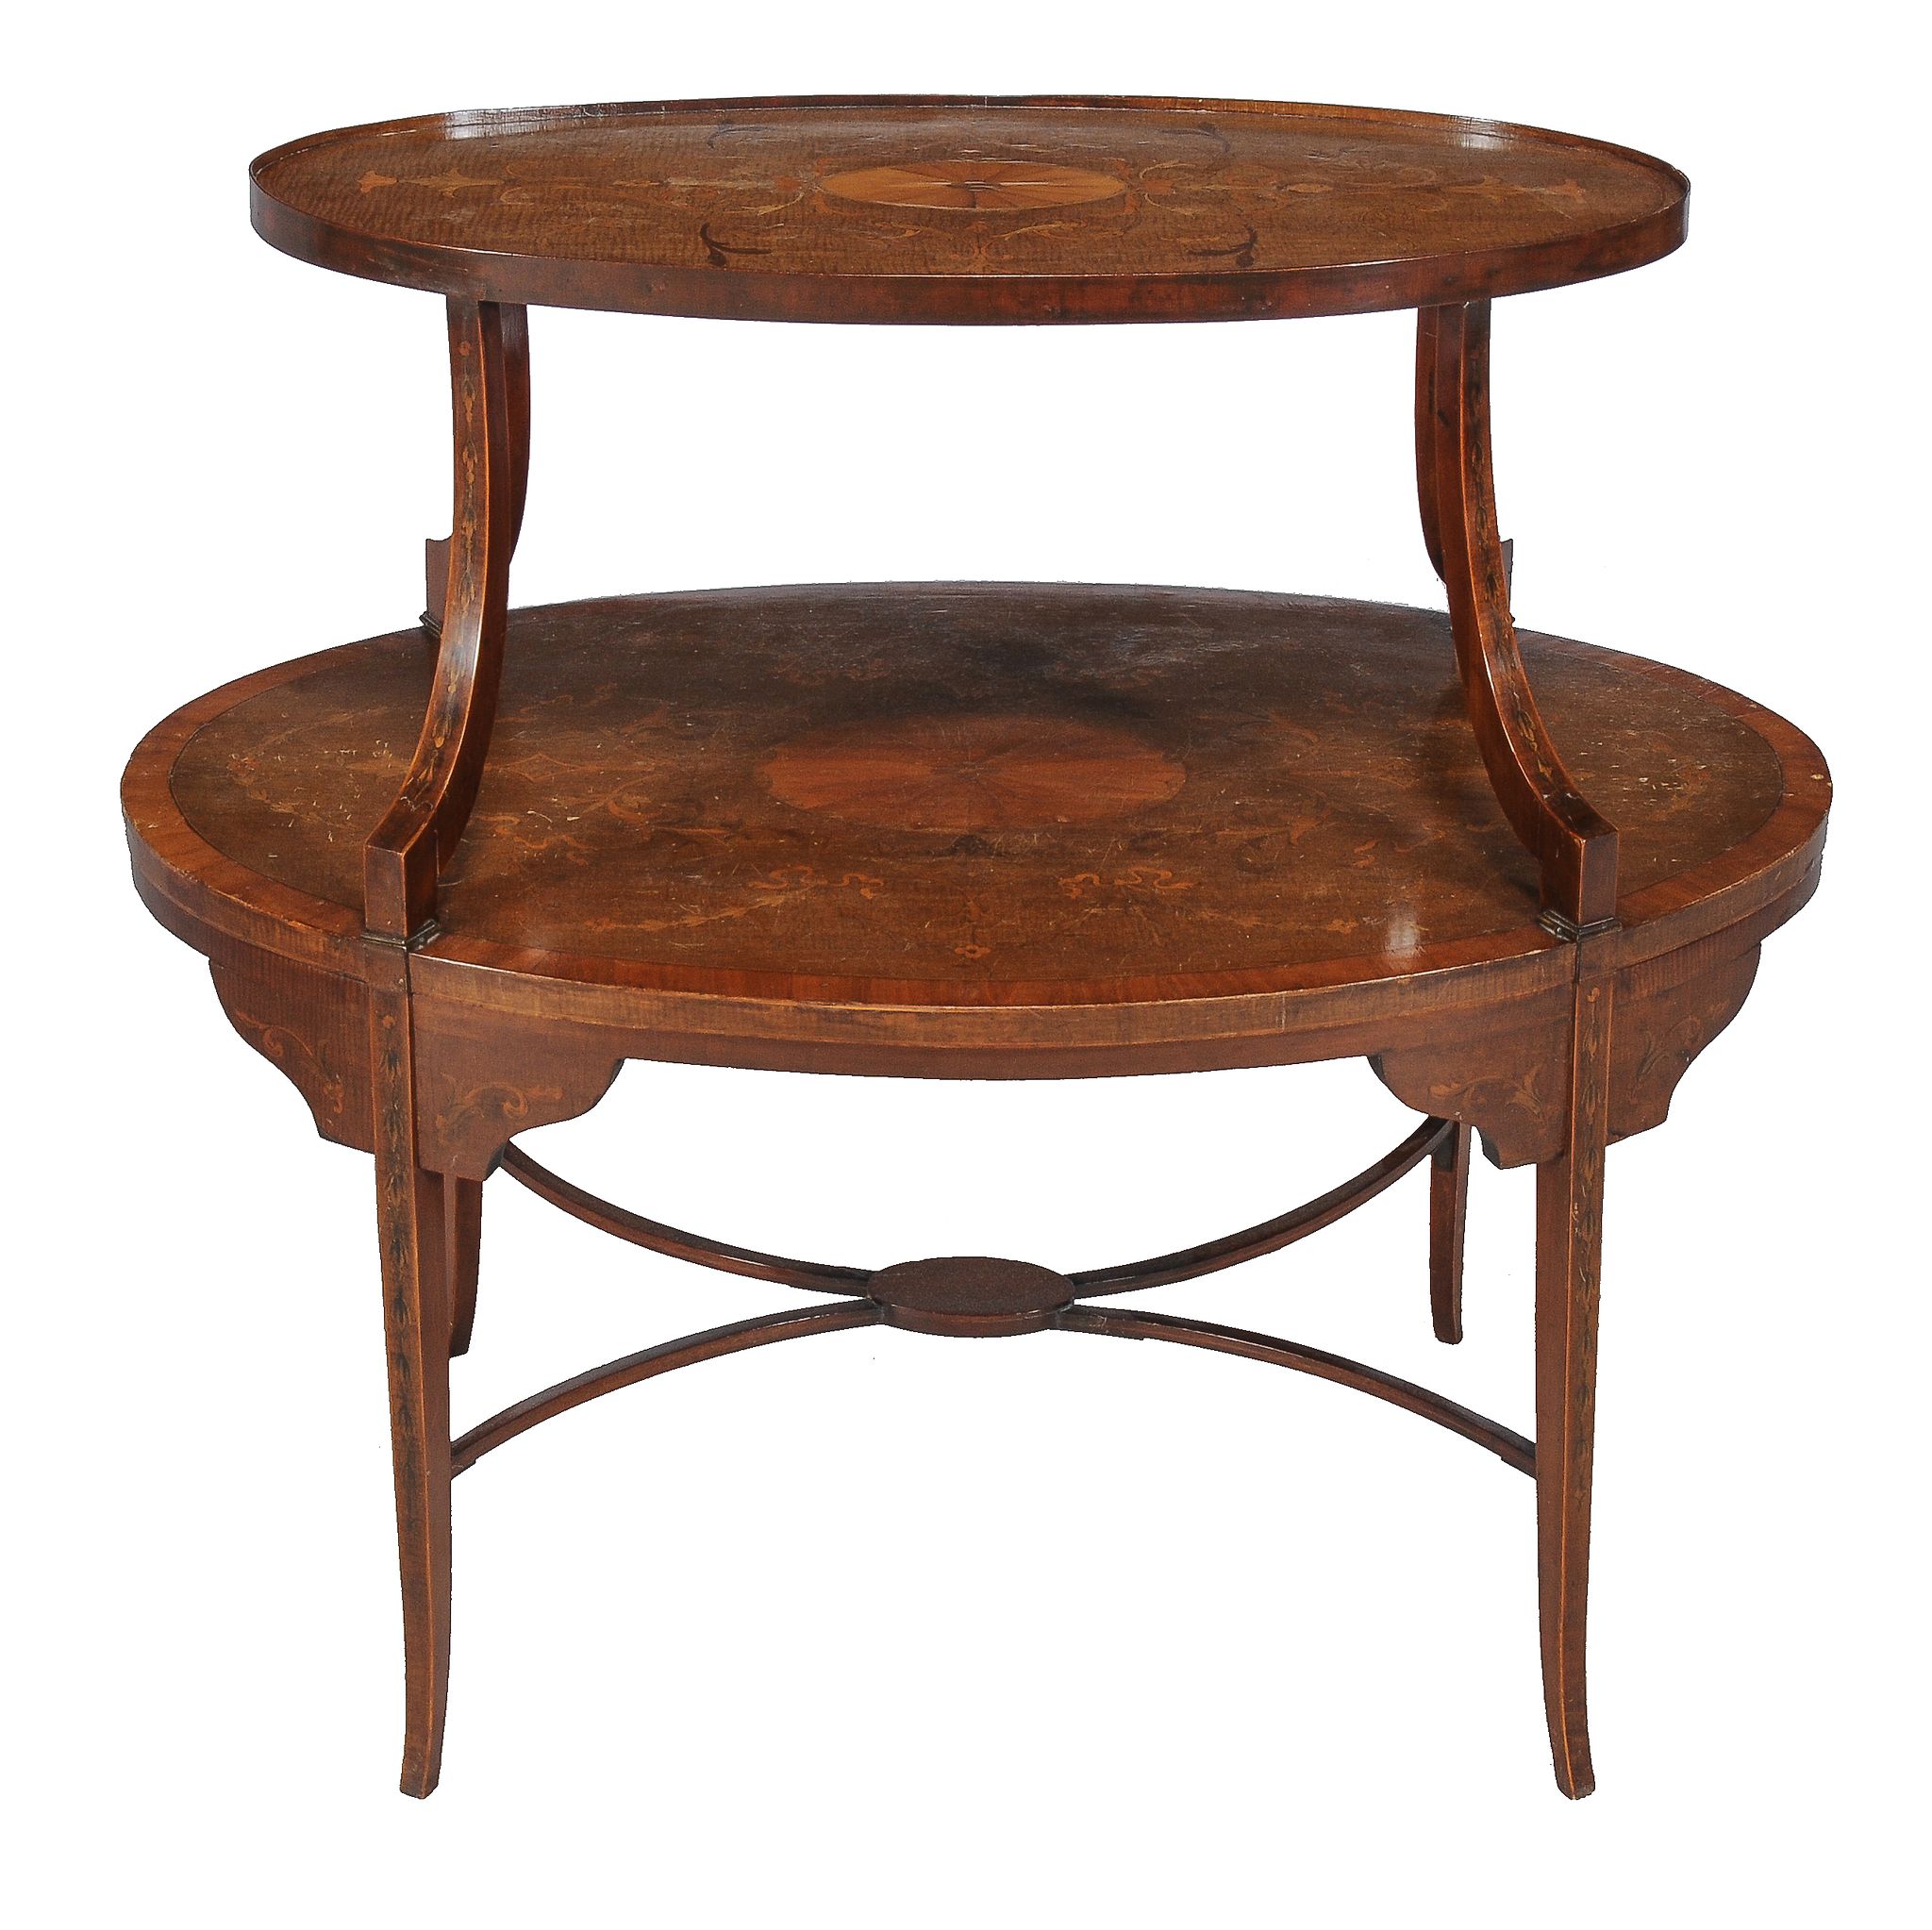 An Edwardian fiddleback mahogany and marquetry inlaid two tier etagere, circa 1910, 90cm wide